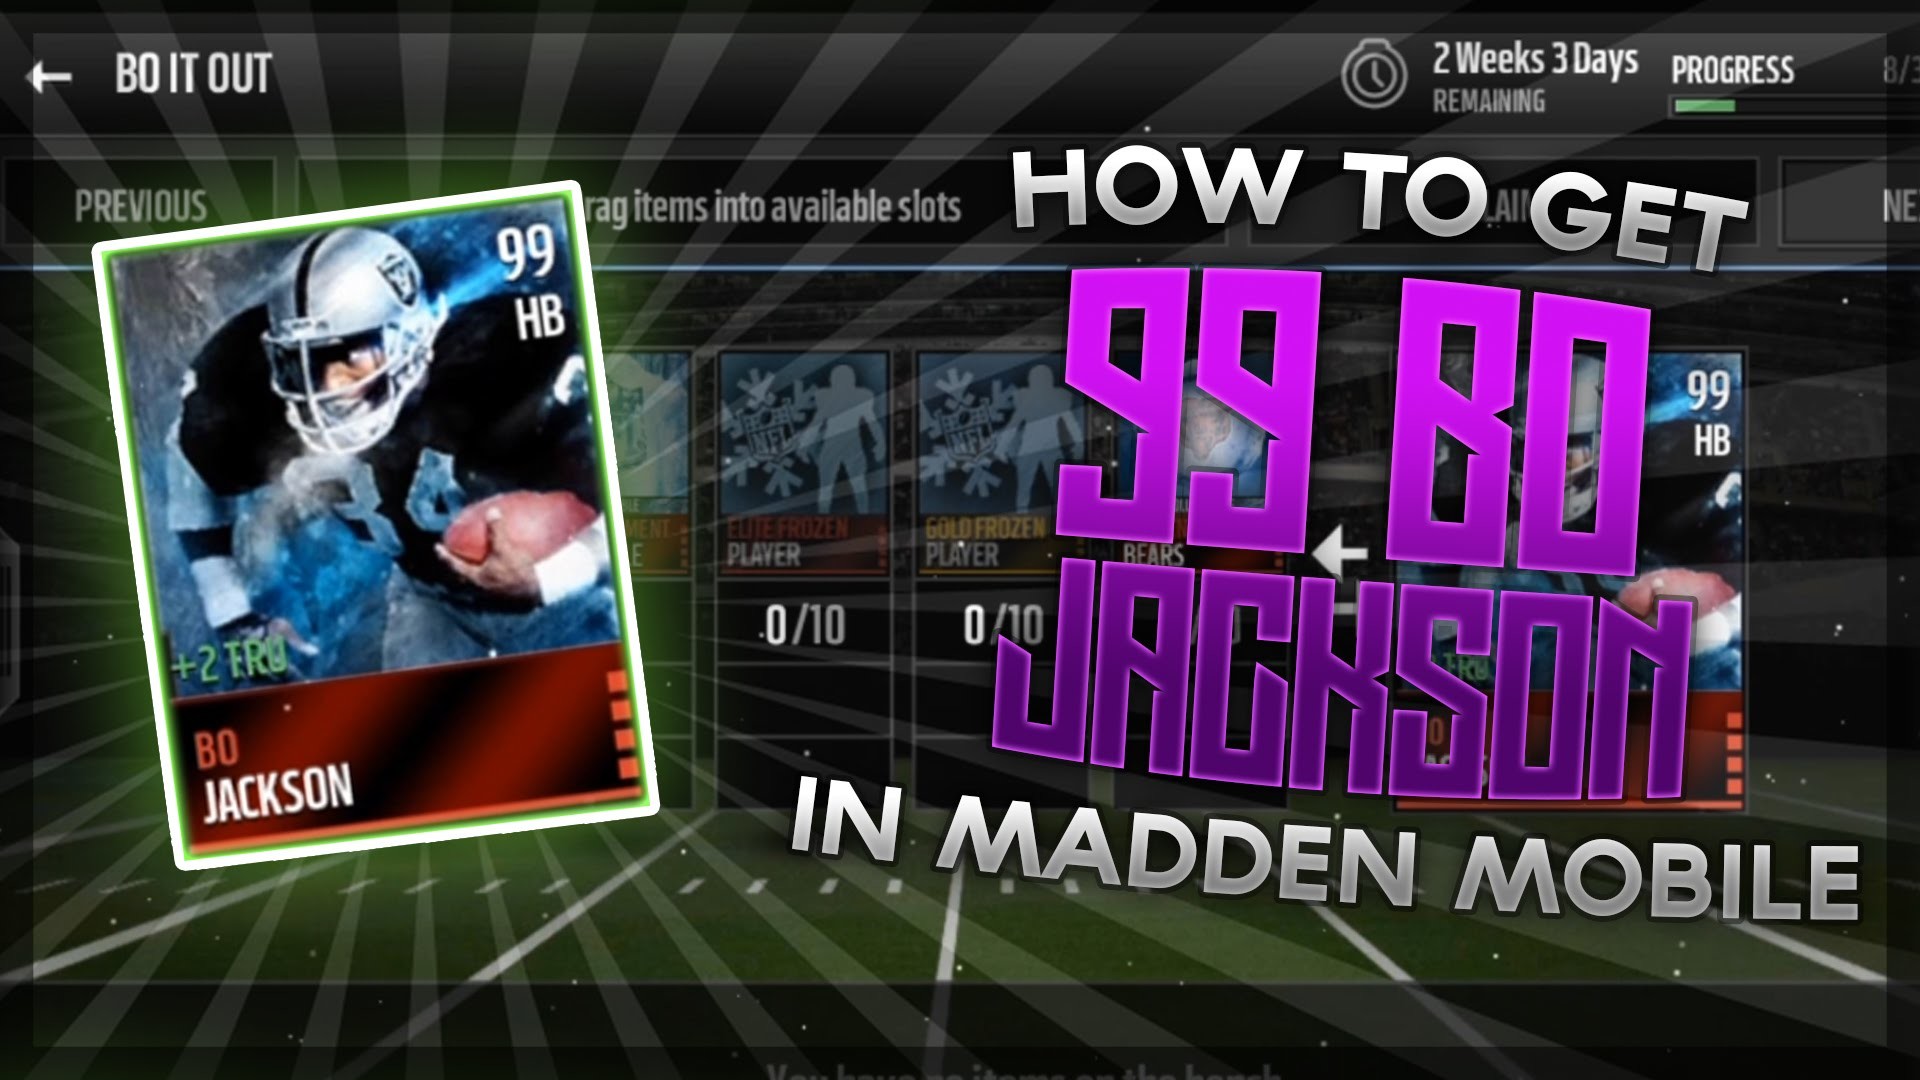 Madden Mobile 16 – HOW TO GET THE NEW 99 BO JACKSON Tips Tricks on how to get him – YouTube